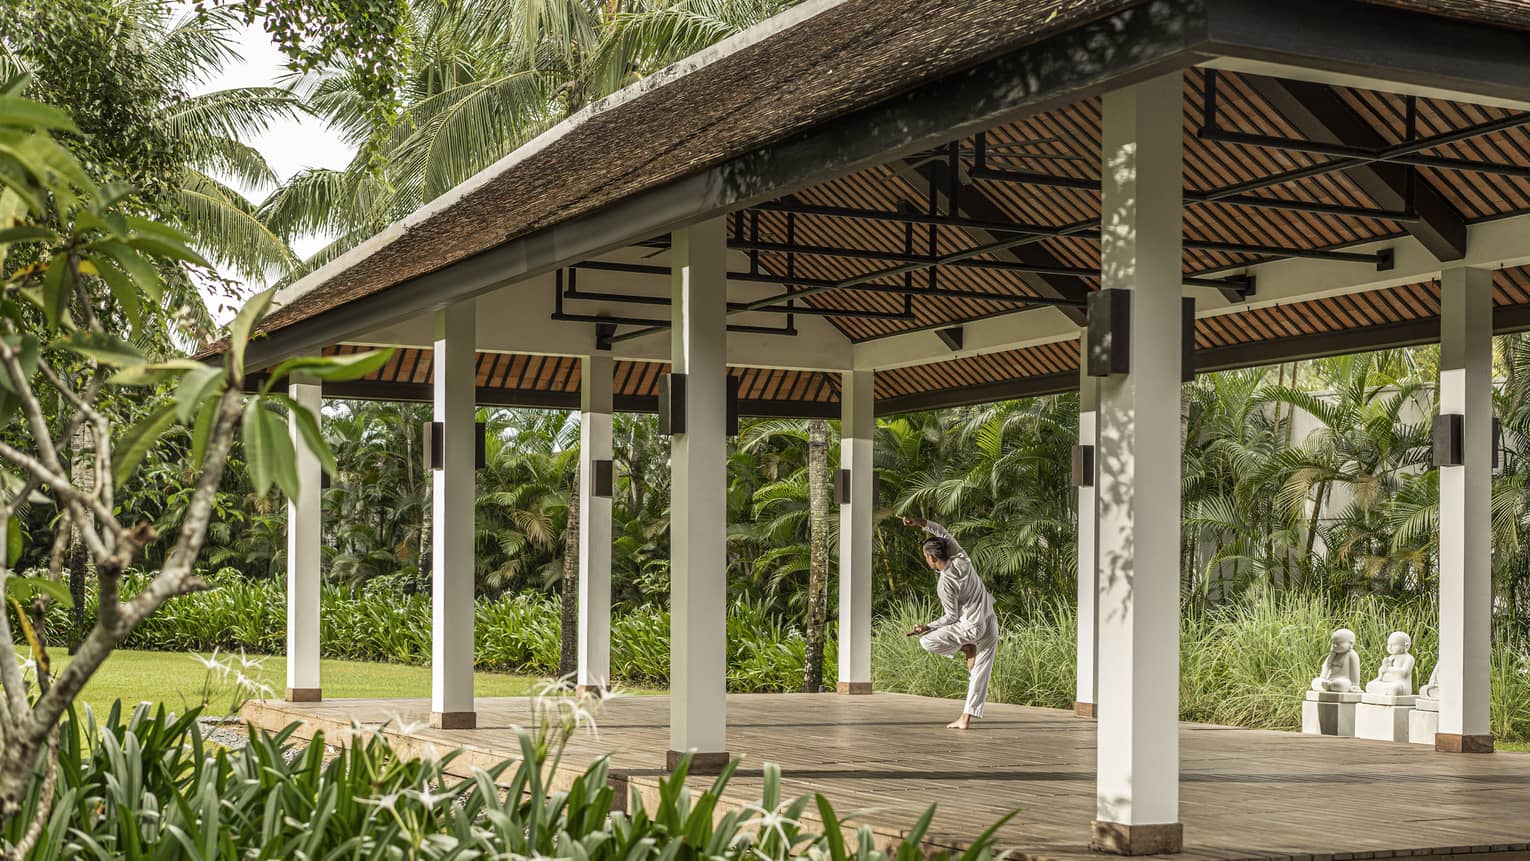 Man practices yoga at an outdoor yoga pavilion surrounded by palm trees